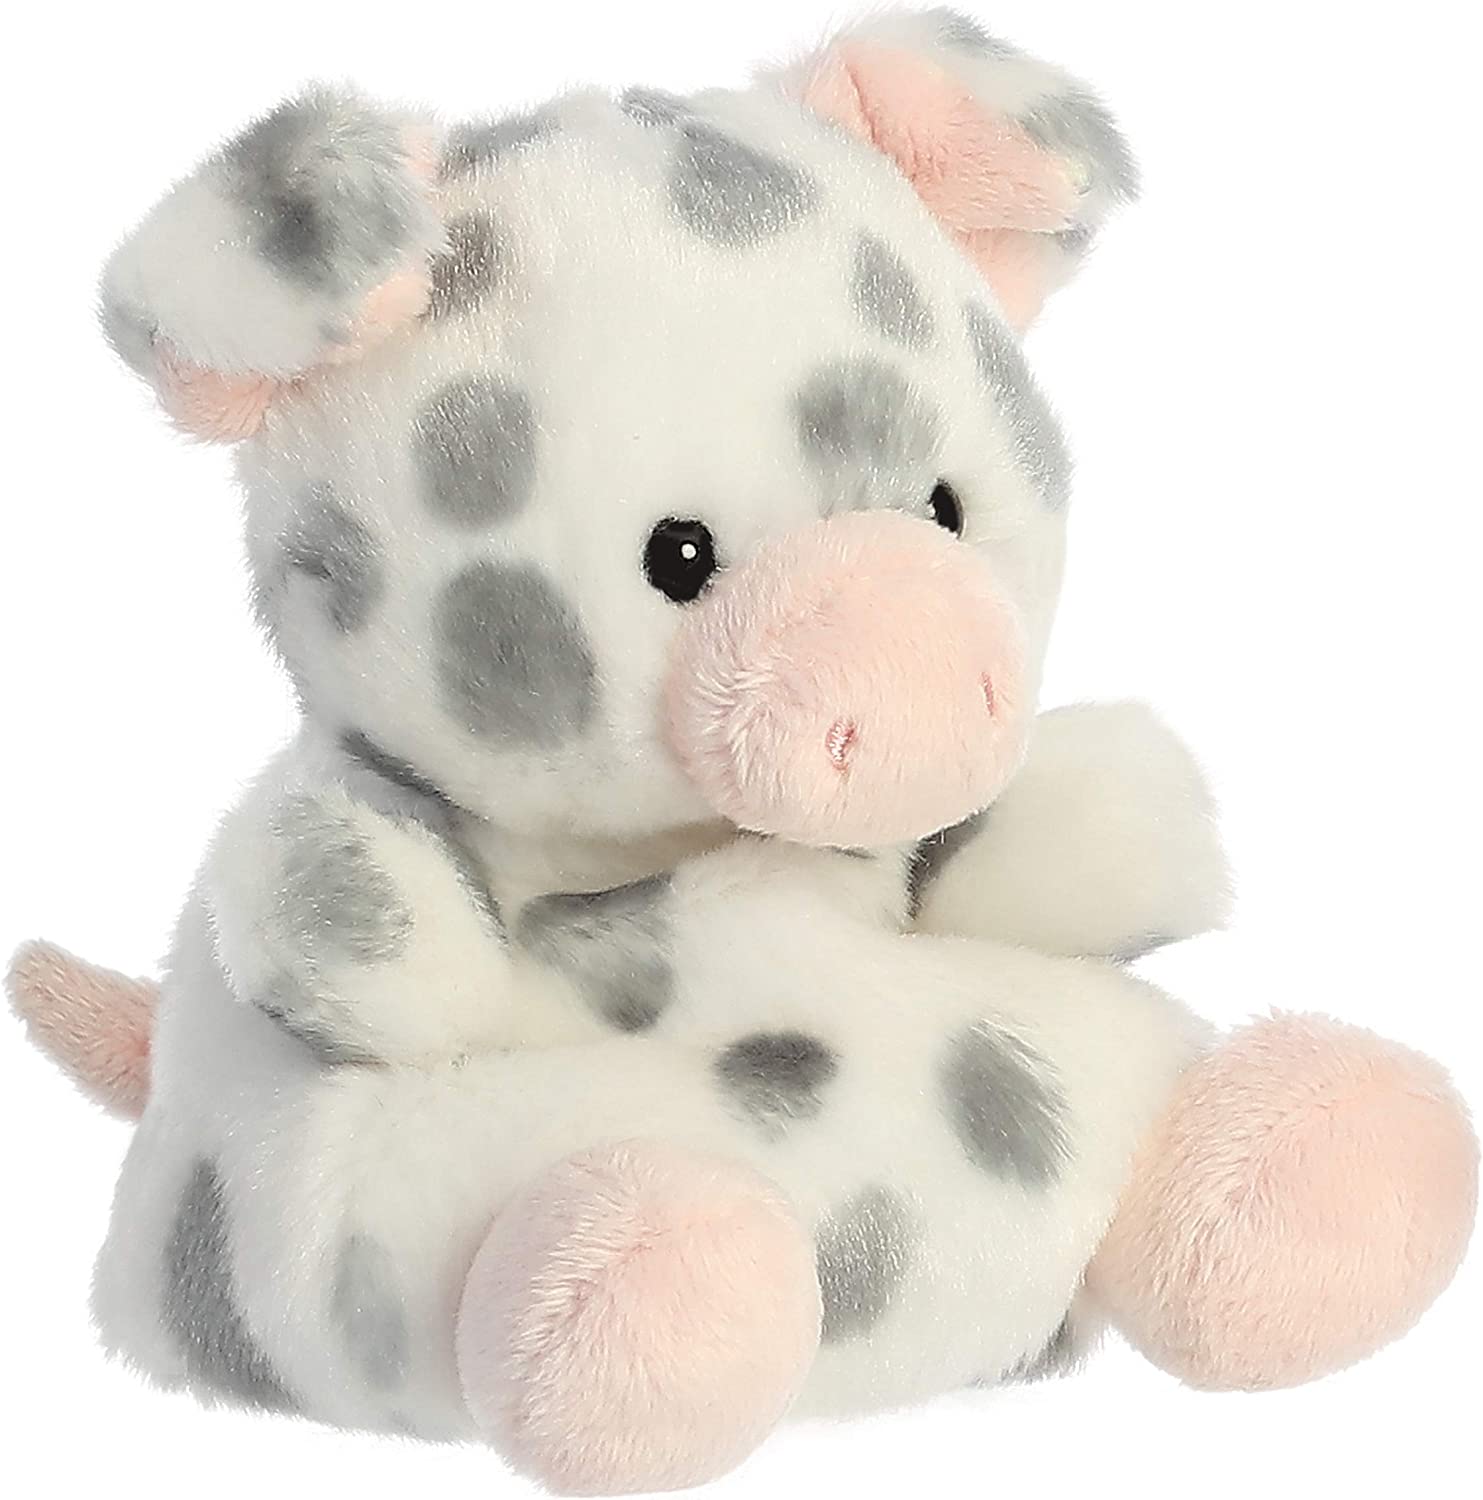 PALM PALS PIGGLES SPOTTED PIGLET 5 INCHES